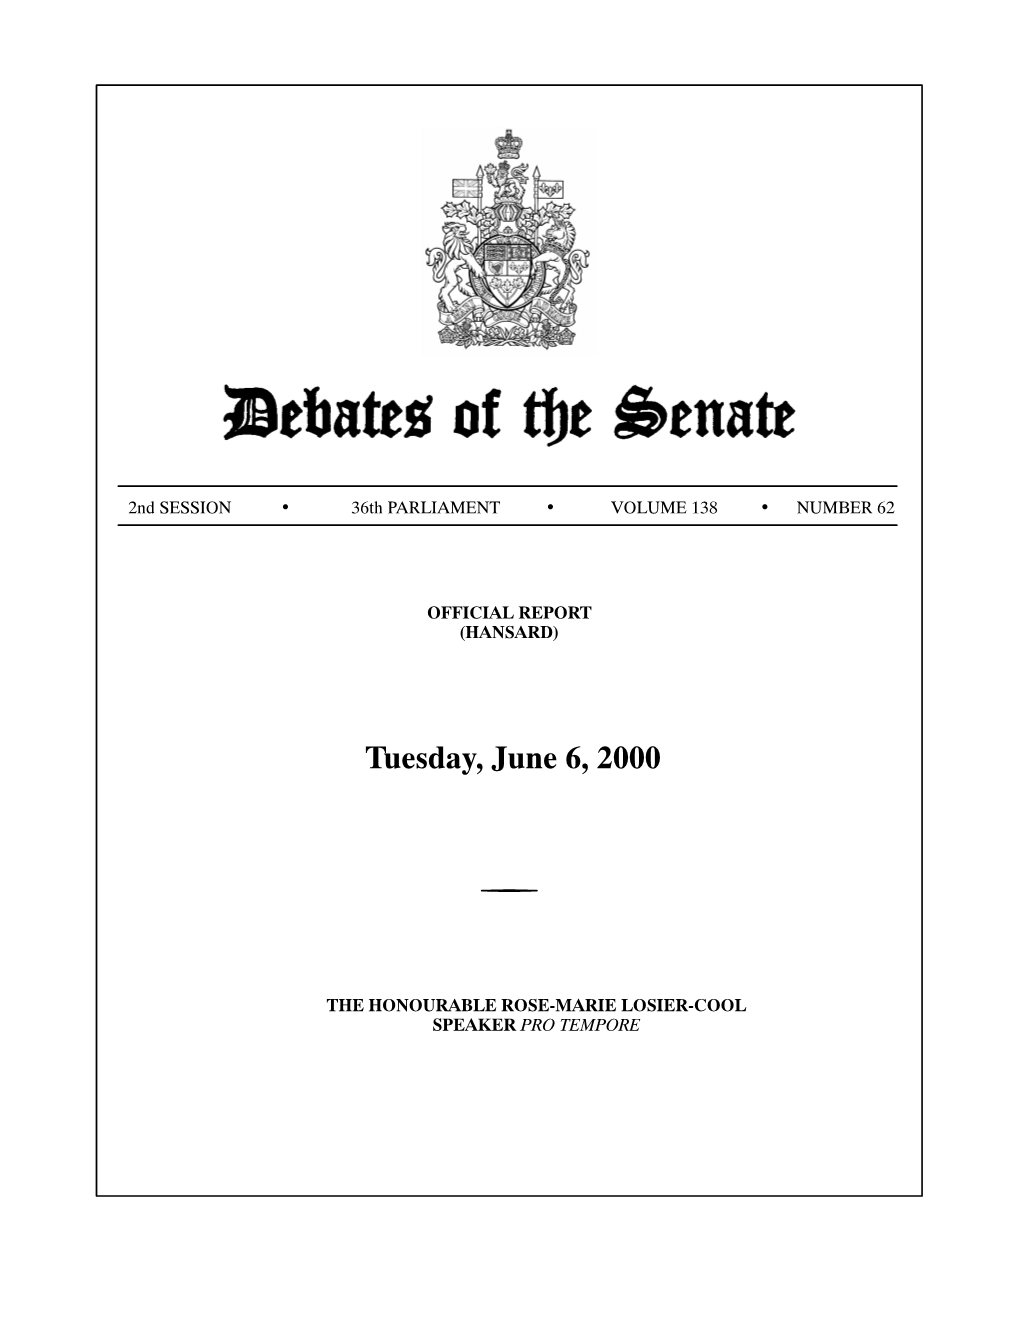 Tuesday, June 6, 2000